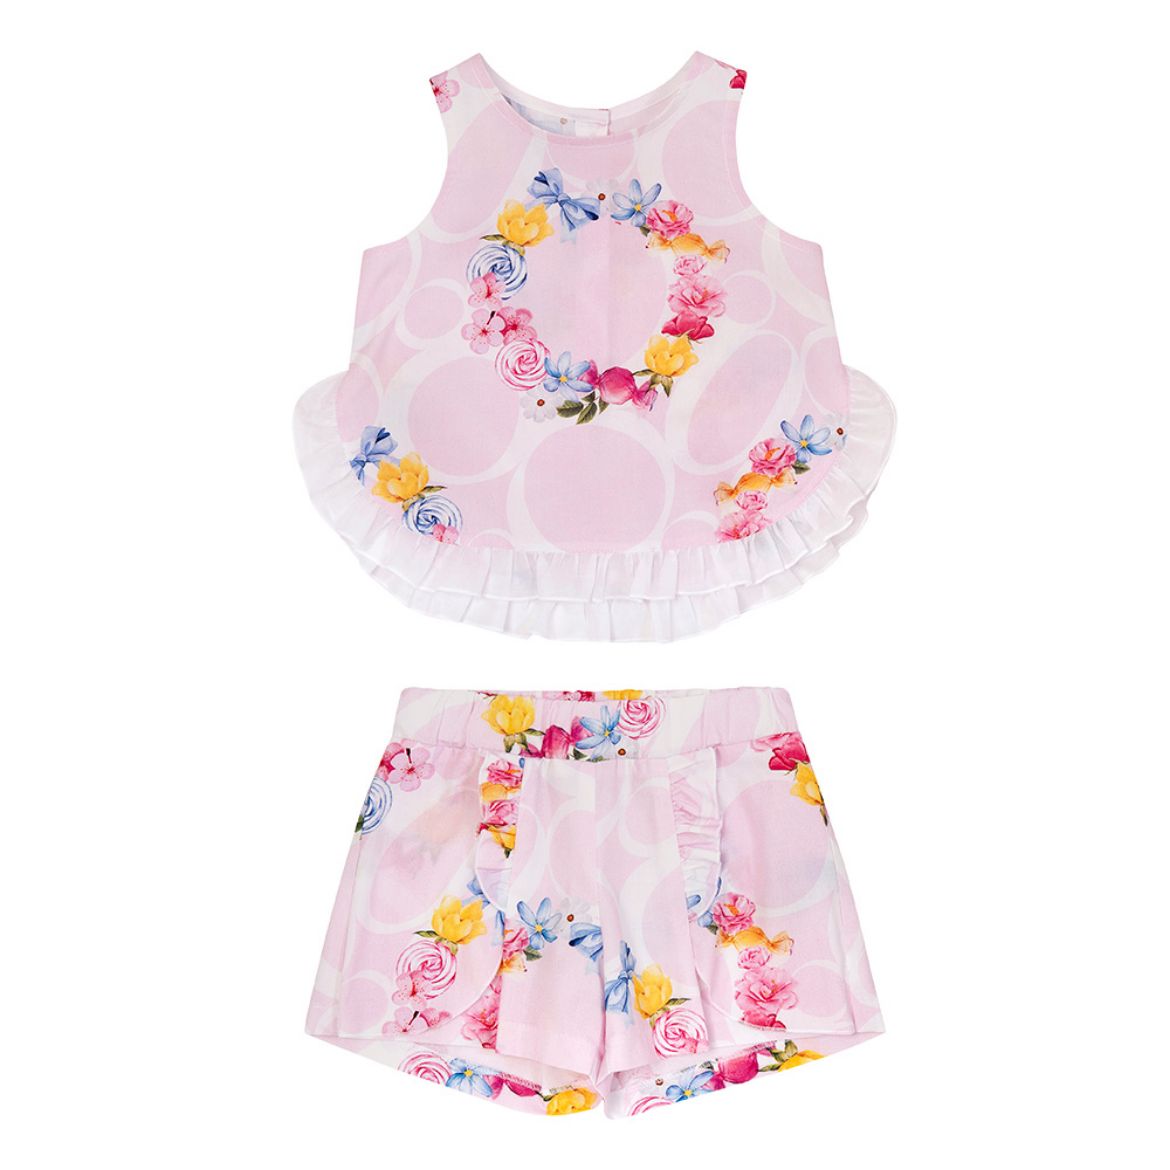 Picture of Balloon Chic Pink Flower Short Set